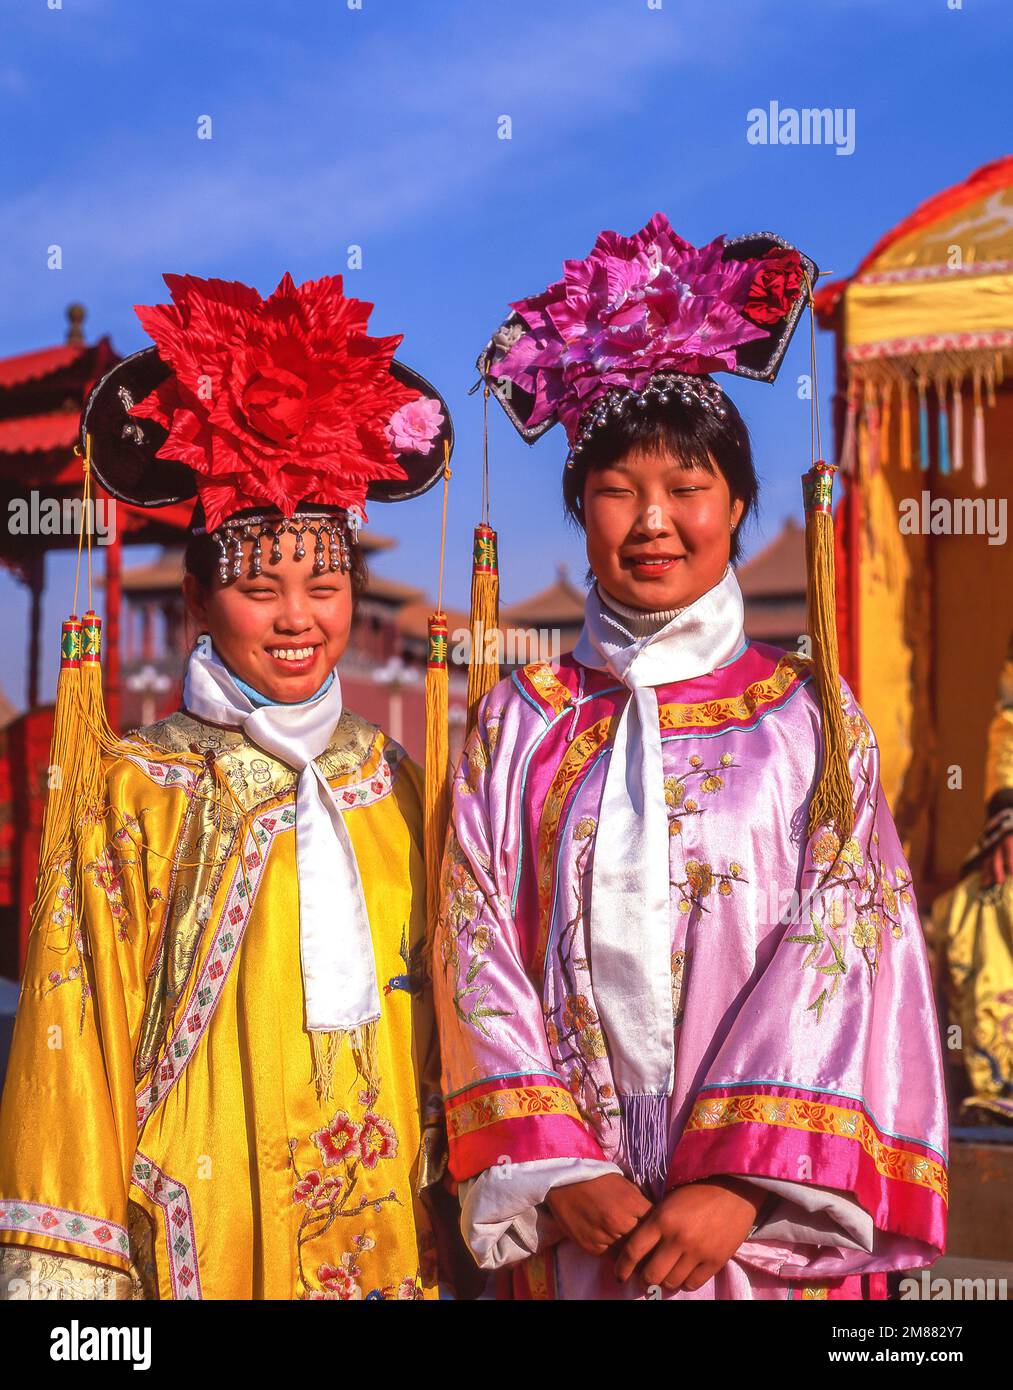 Tourists dressed in Imperial costume, The Forbidden City (Zǐjìnchéng), Dongcheng, Beijing, The People's Republic of China Stock Photo